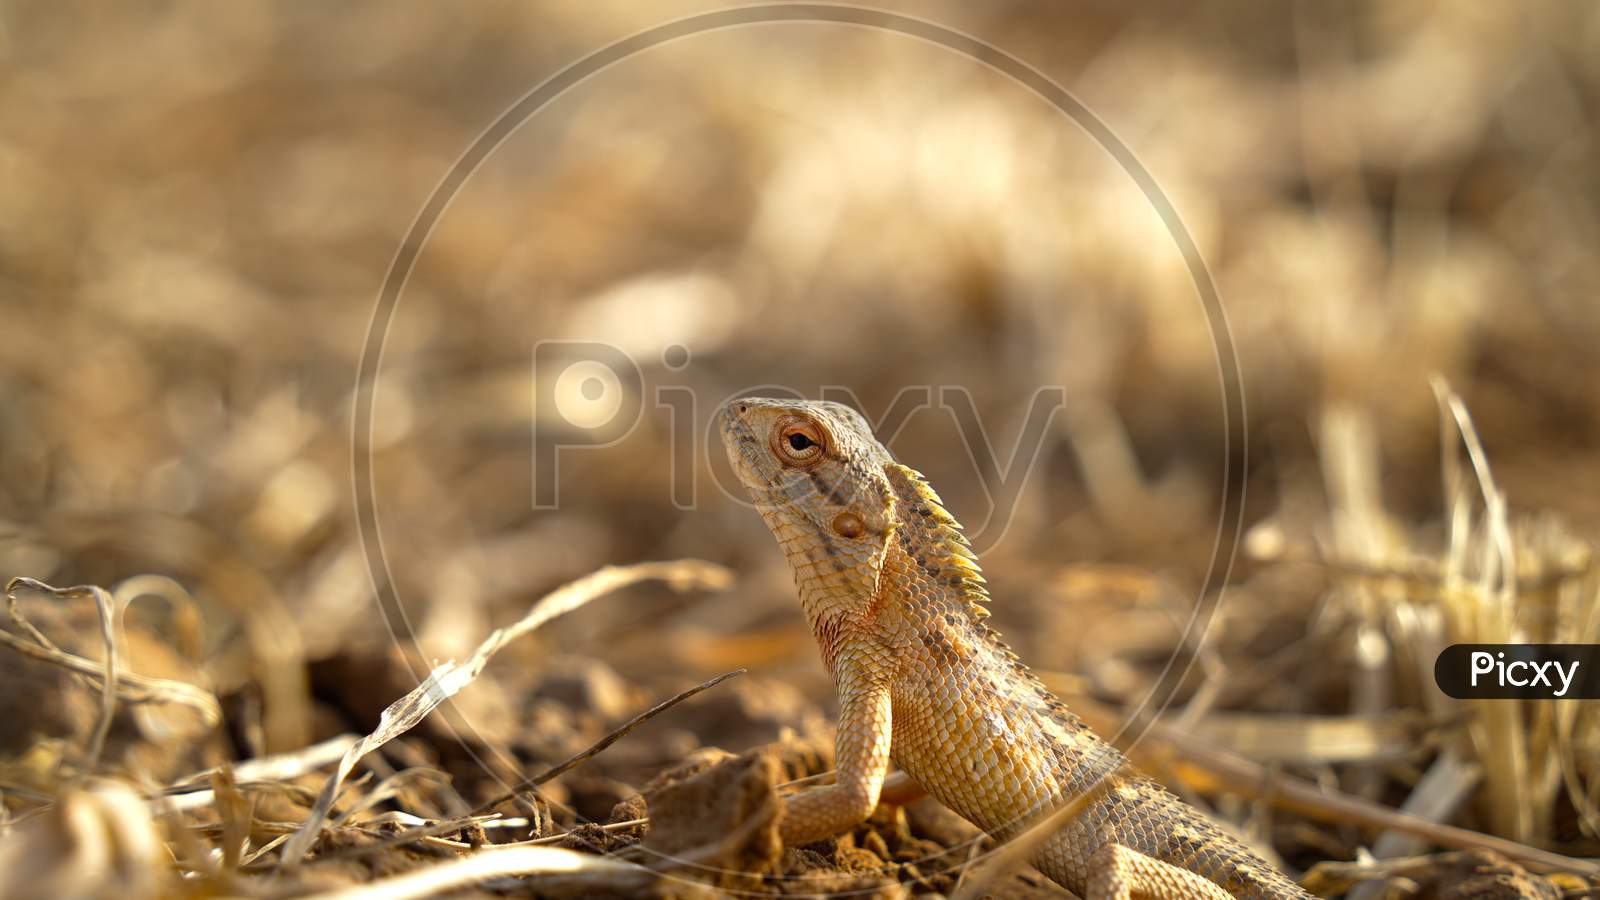 The Common Basilisk Or Basiliscus Is A Species Of Lizard In The Family Corytophanidae. Wild Lizard Concept.